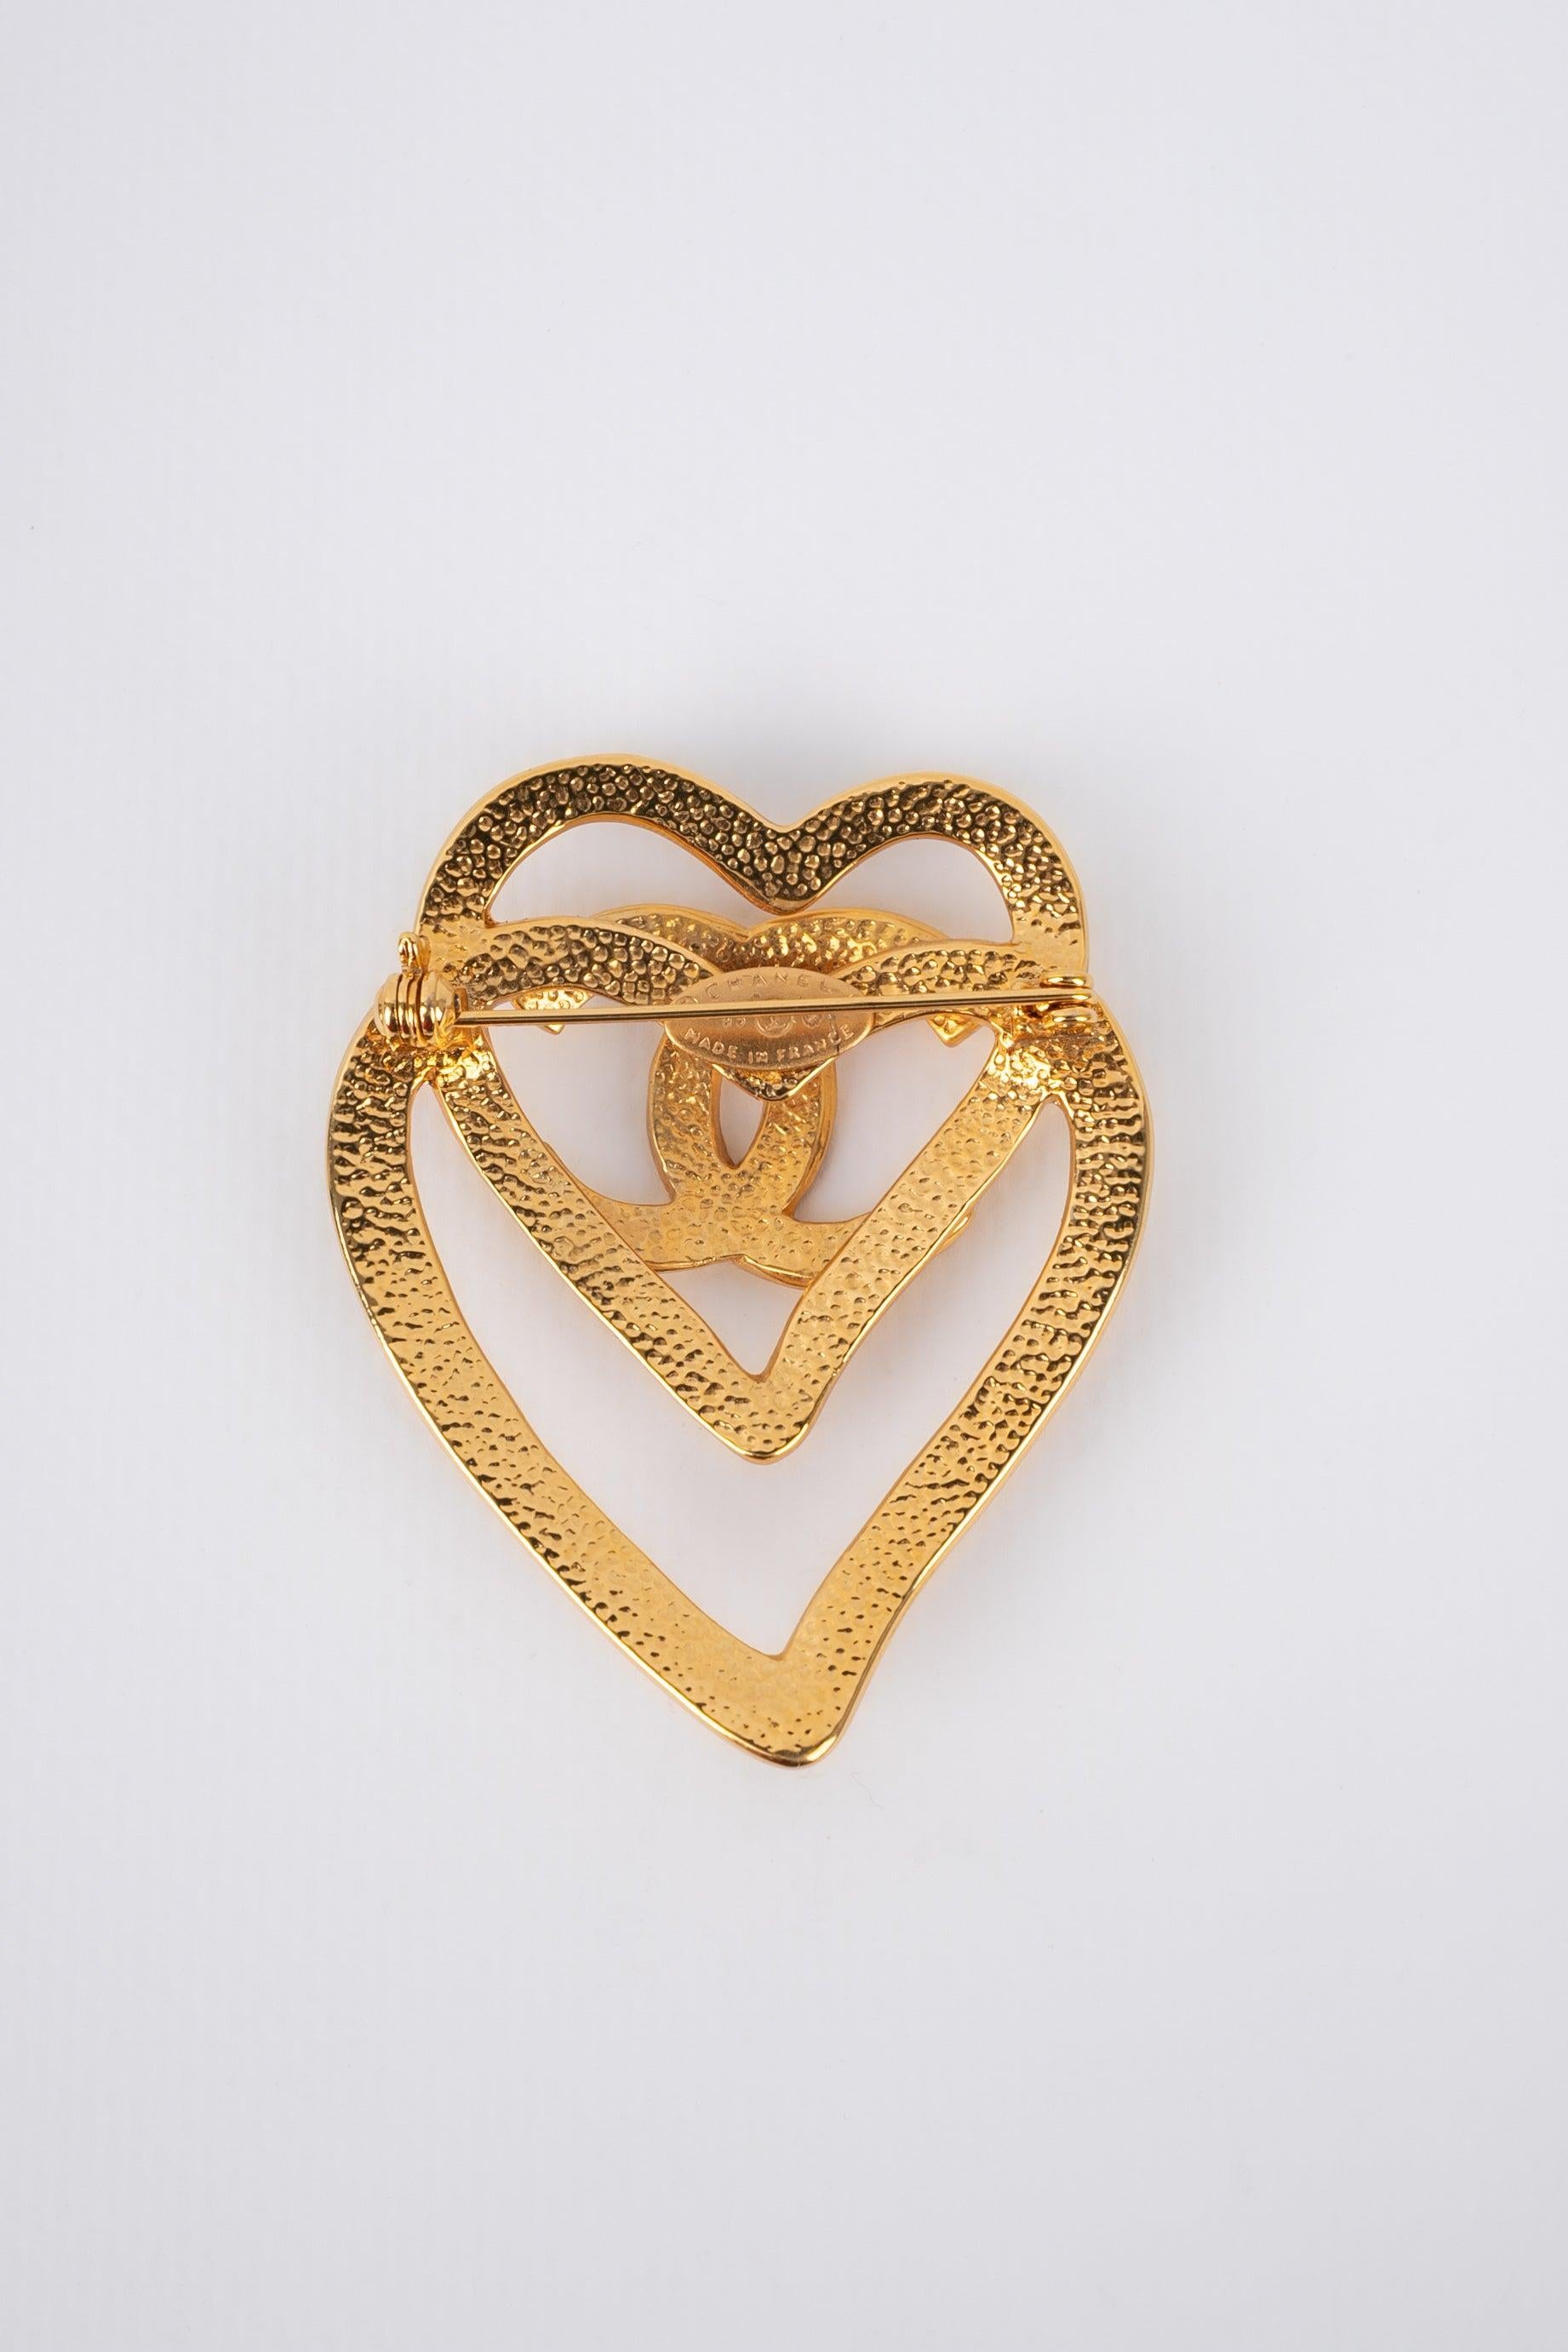 Chanel - (Made in France) Golden metal brooch representing two hearts topped with a cc logo. 1995 Spring-Summer Collection.

Additional information:
Condition: Very good condition
Dimensions: 6 cm x 4.5 cm
Period: 20th Century

Seller Reference: